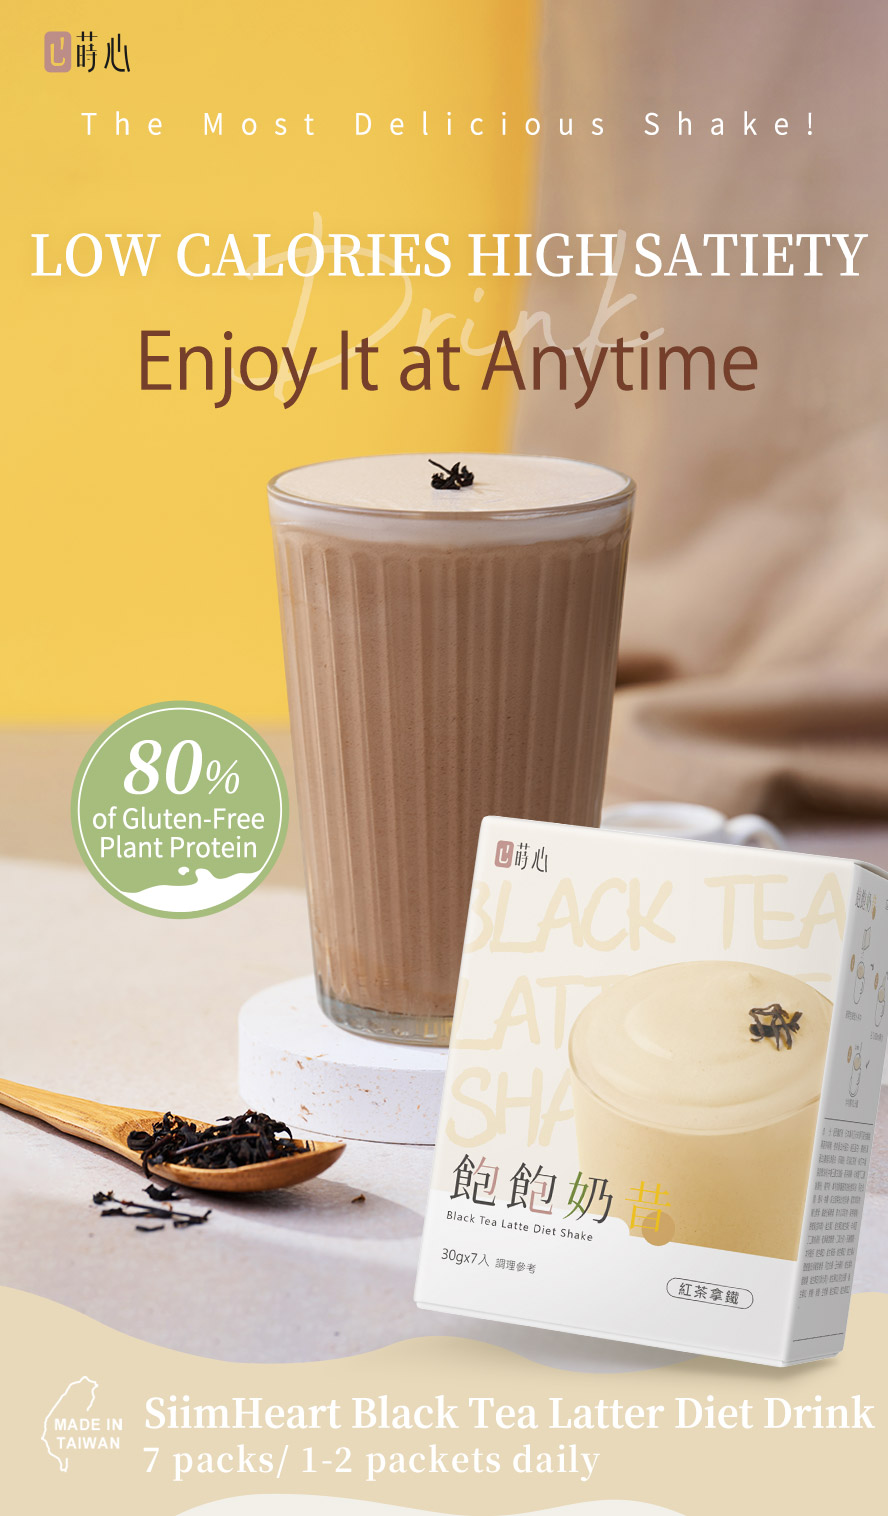 Black Tea Latte Diet Shake has 80% of gluten-free plant protein & rich black tea flavour with the less calories but more enjoyment even during diet!